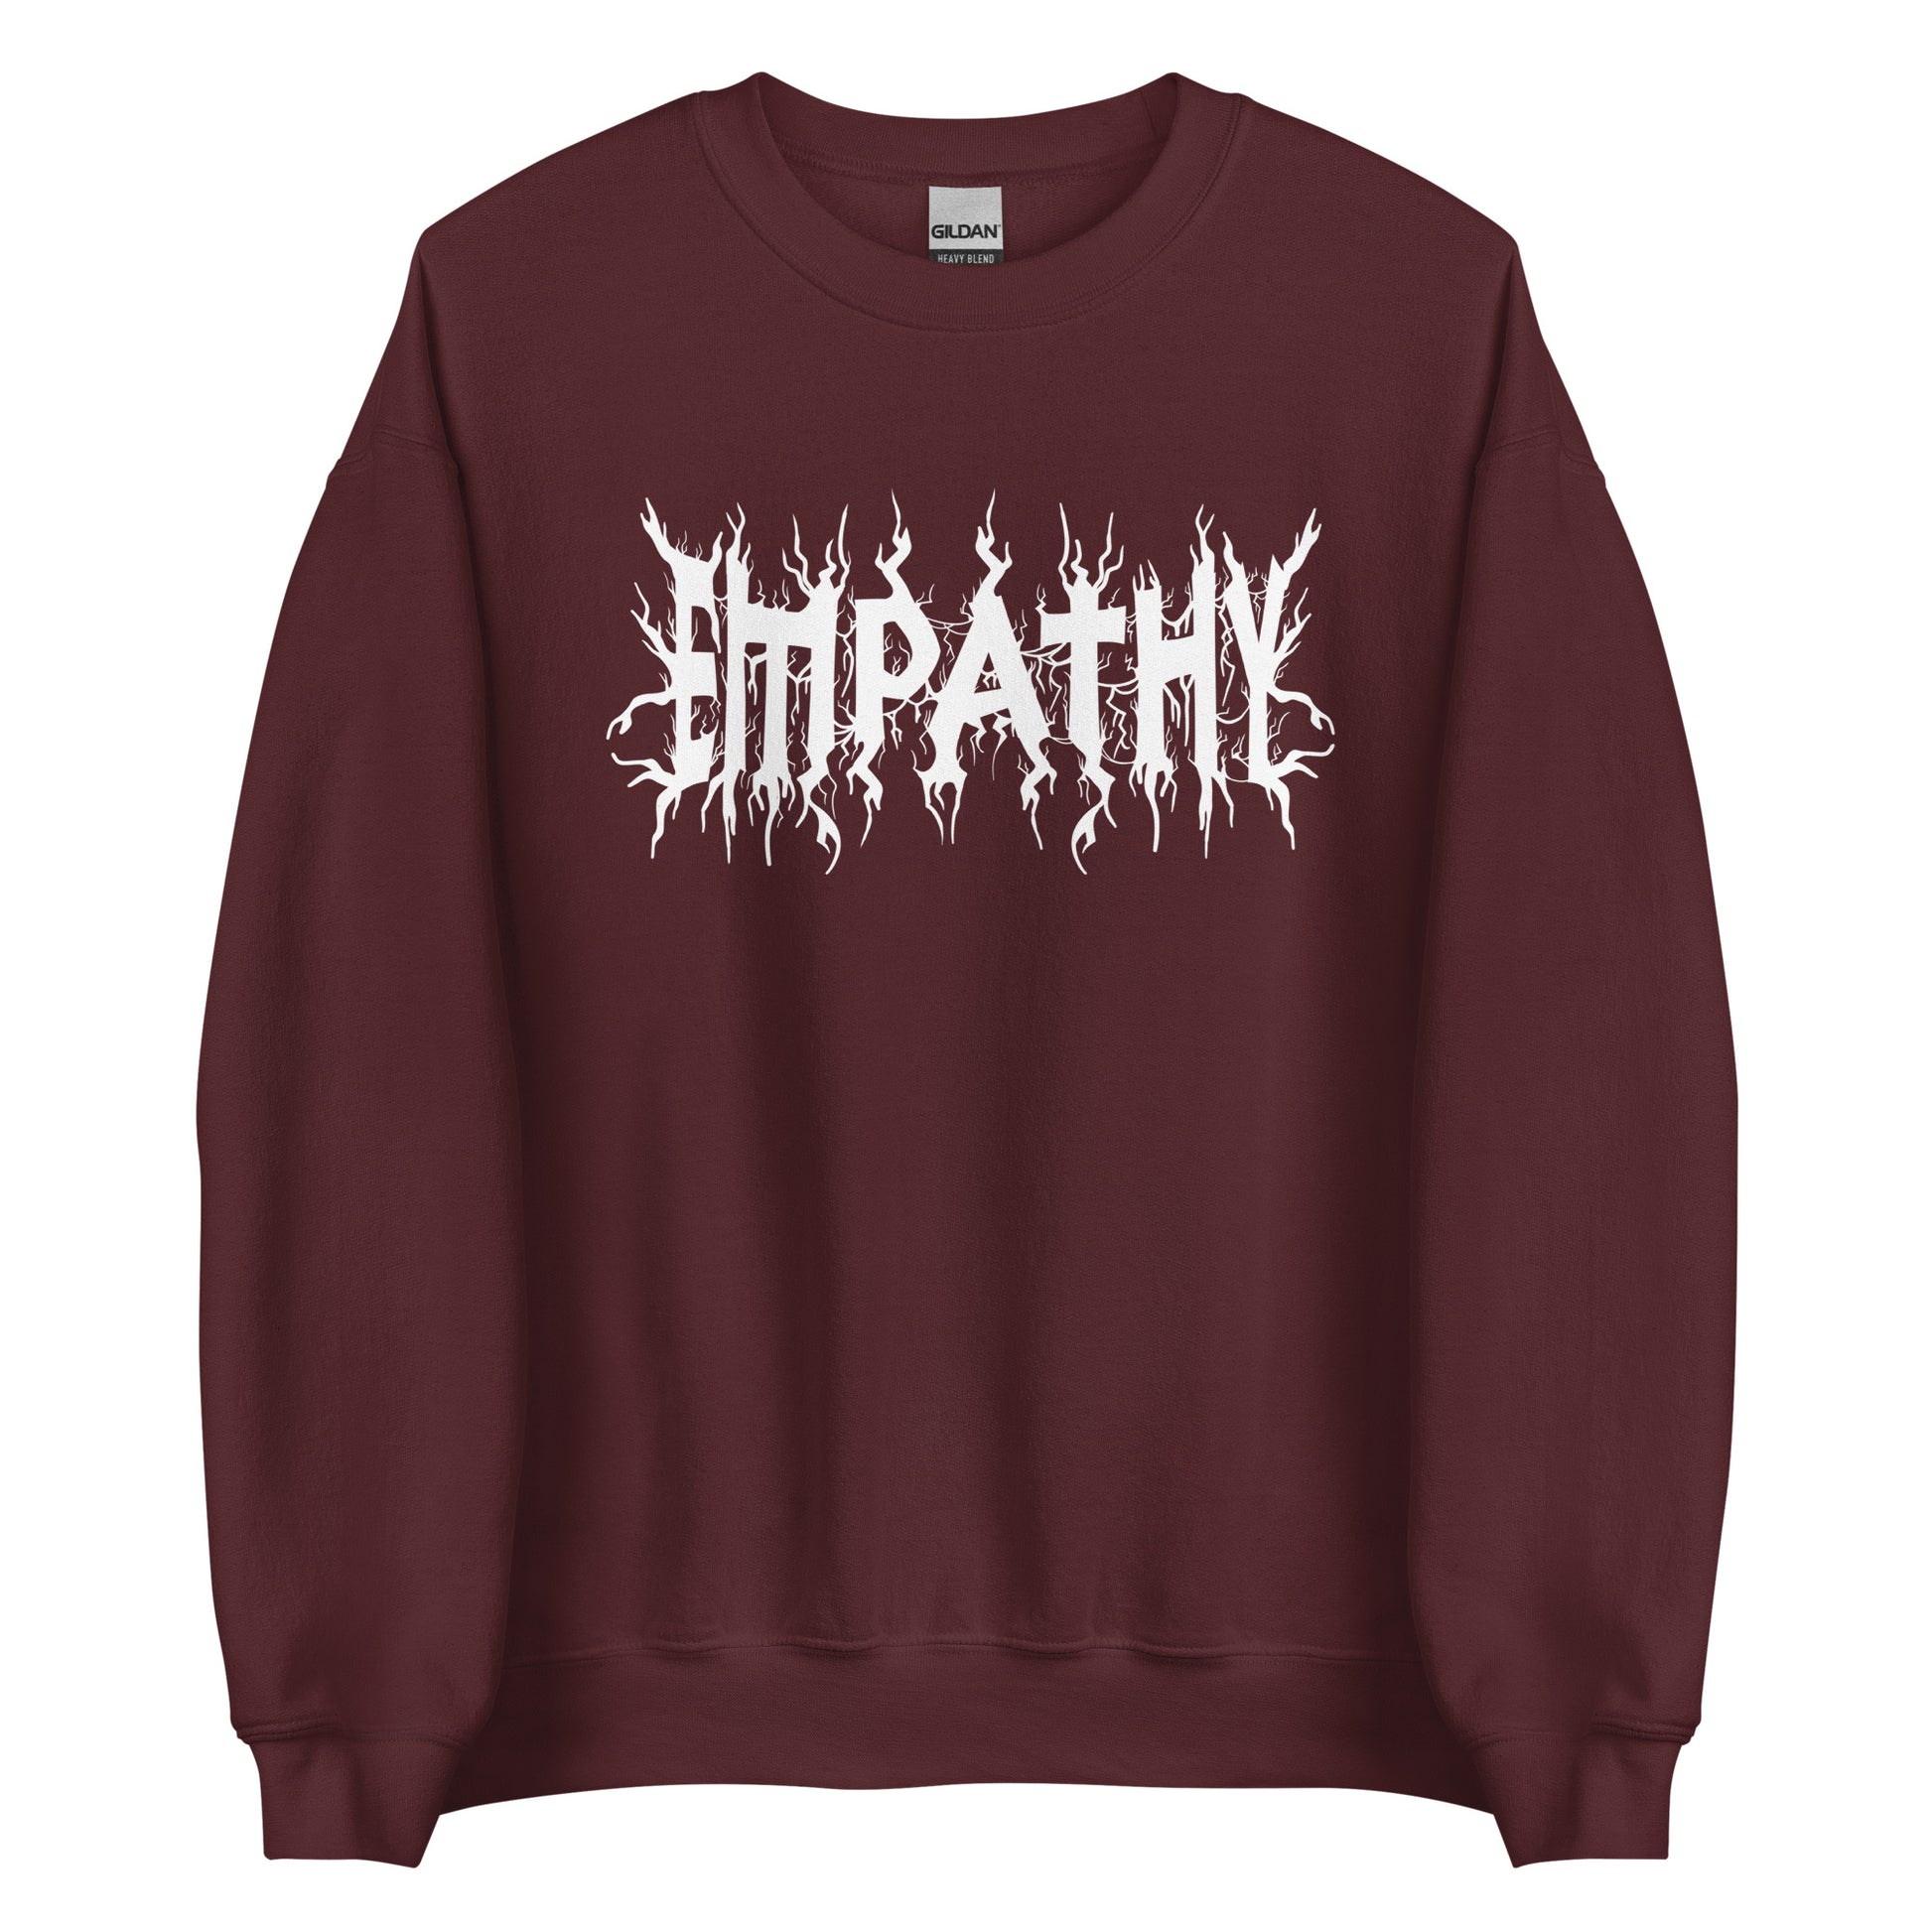 A maroon crewneck sweatshirt featuring white text that reads "Empathy" in a jagged font in the style of heavy metal band shirts